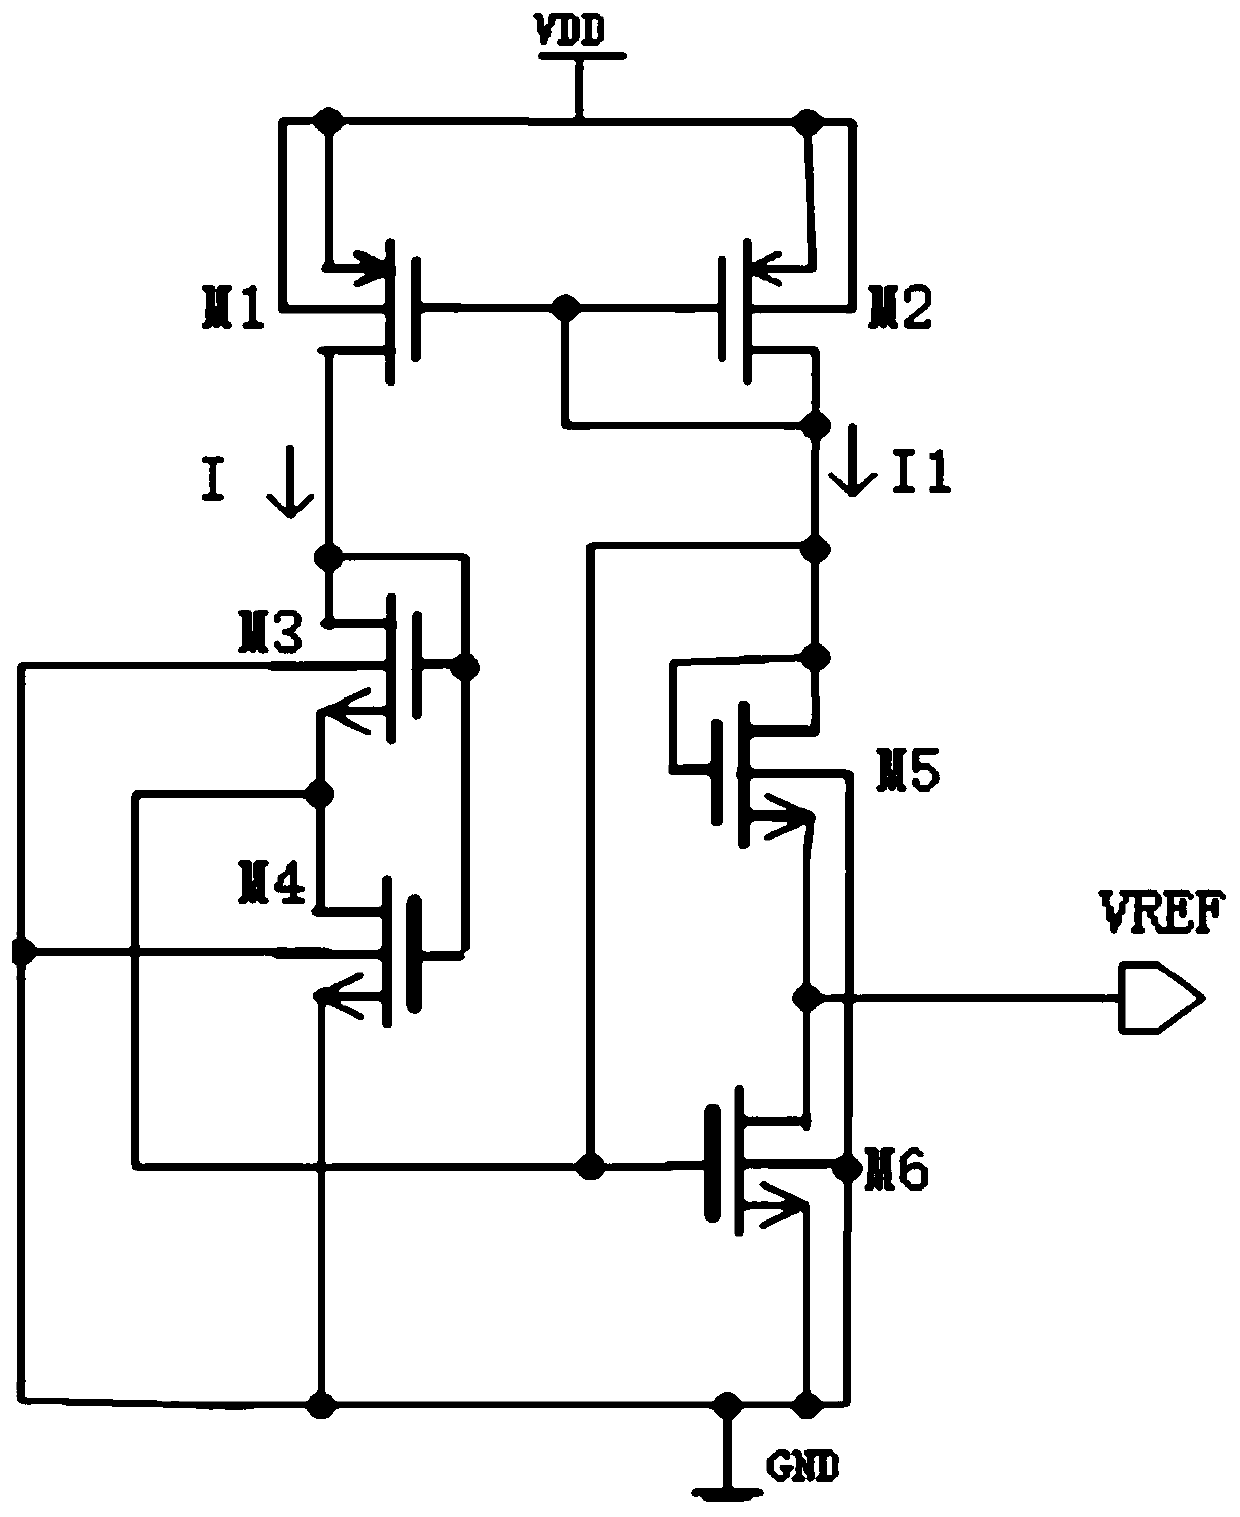 Reference voltage generating device